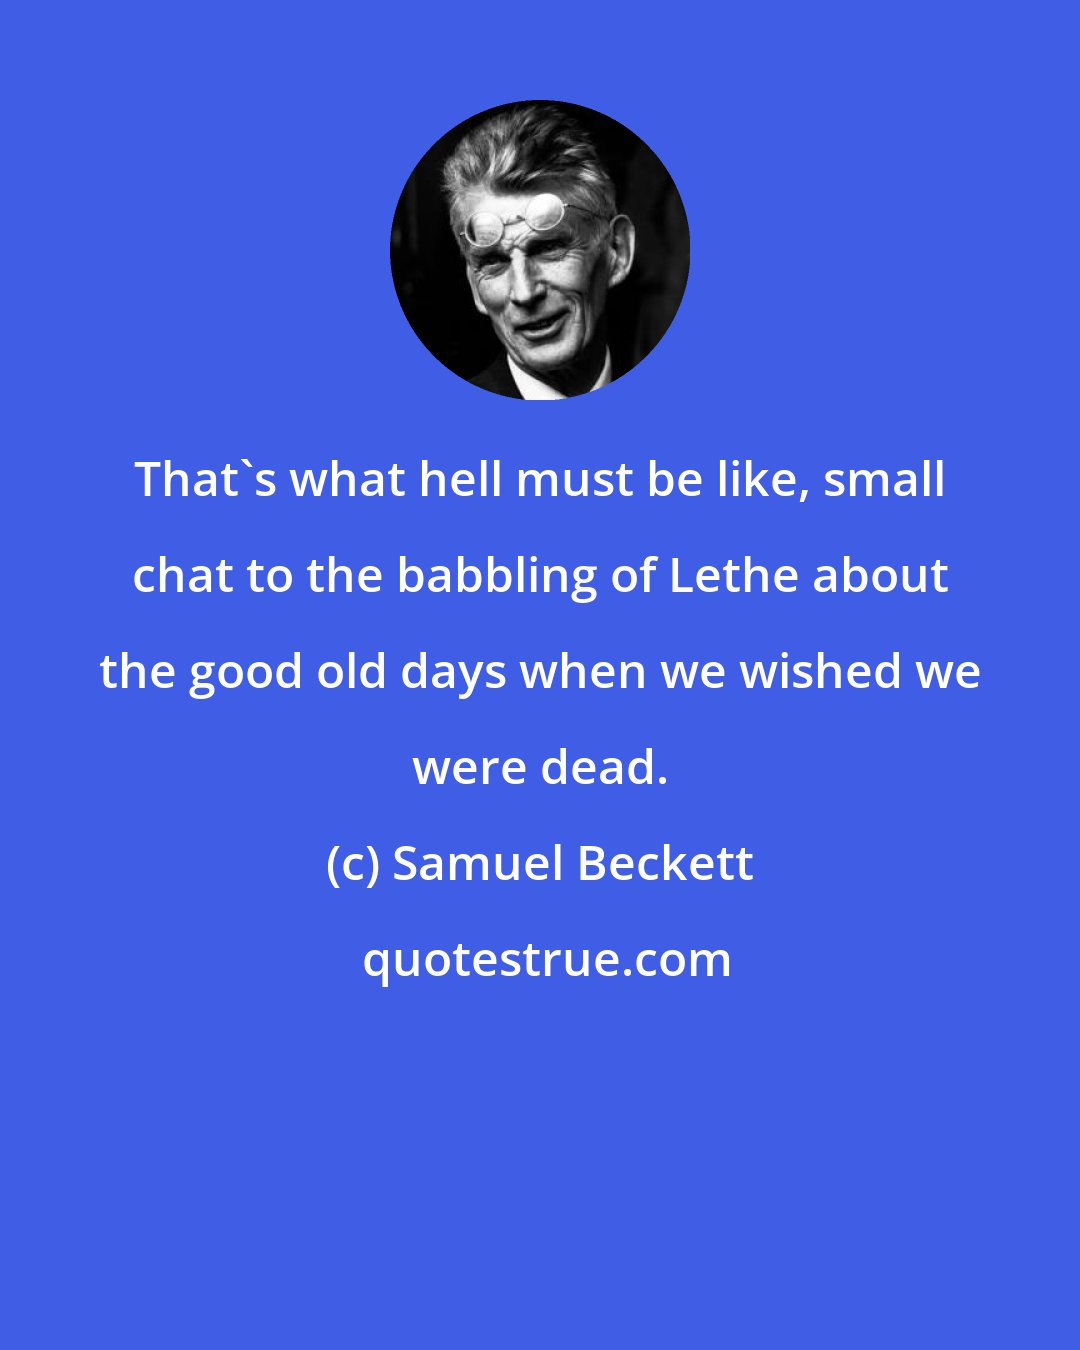 Samuel Beckett: That's what hell must be like, small chat to the babbling of Lethe about the good old days when we wished we were dead.